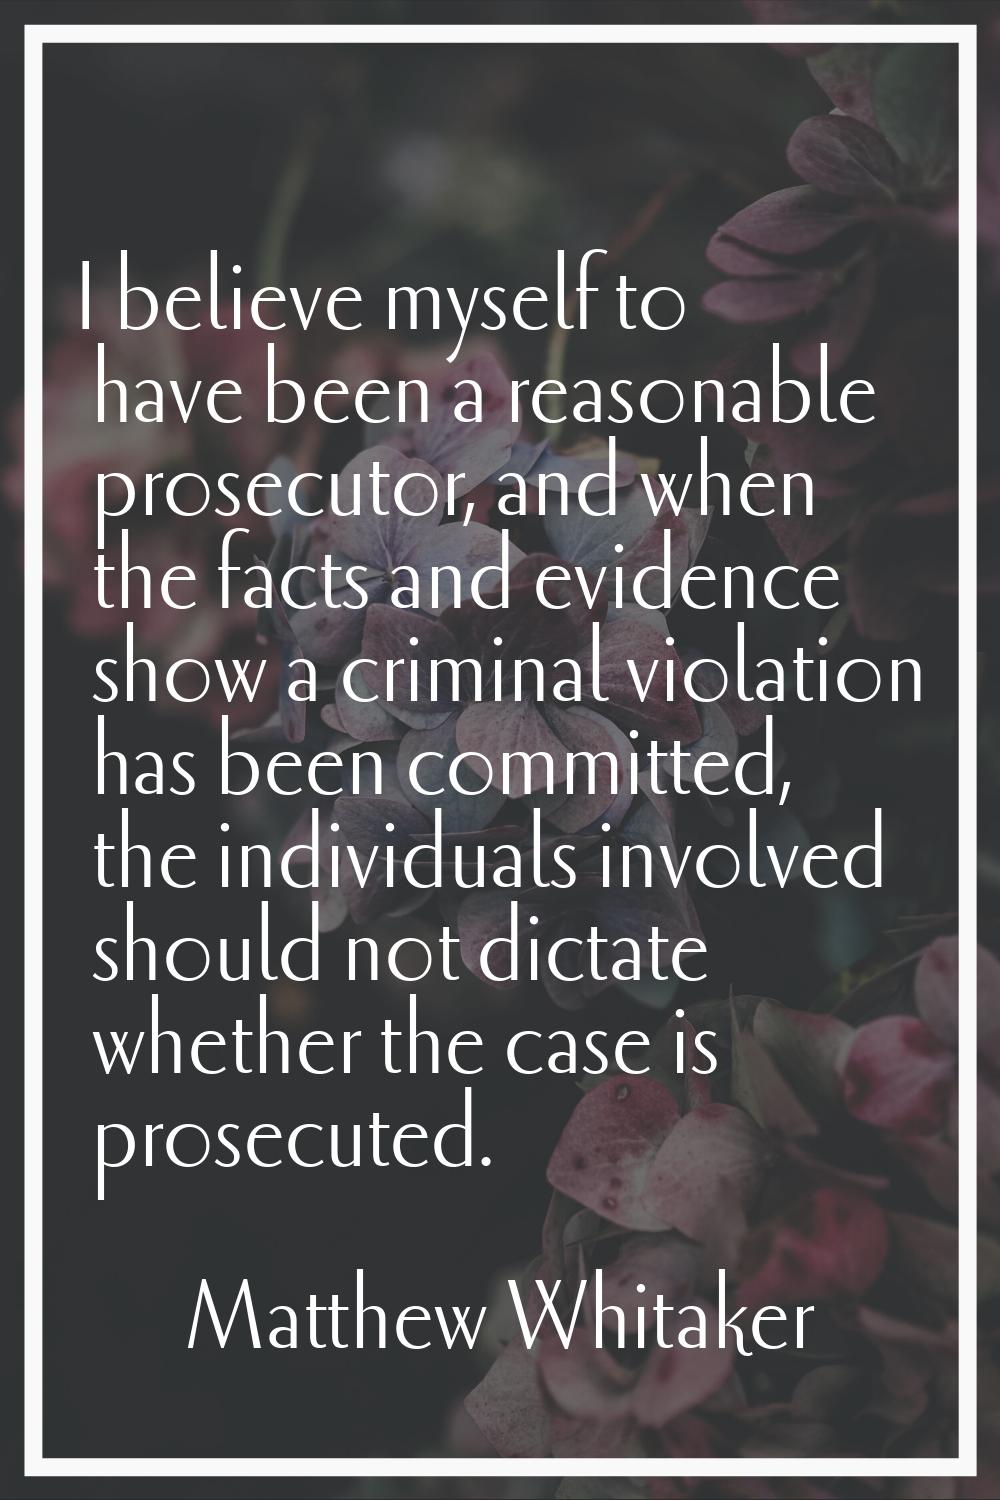 I believe myself to have been a reasonable prosecutor, and when the facts and evidence show a crimi